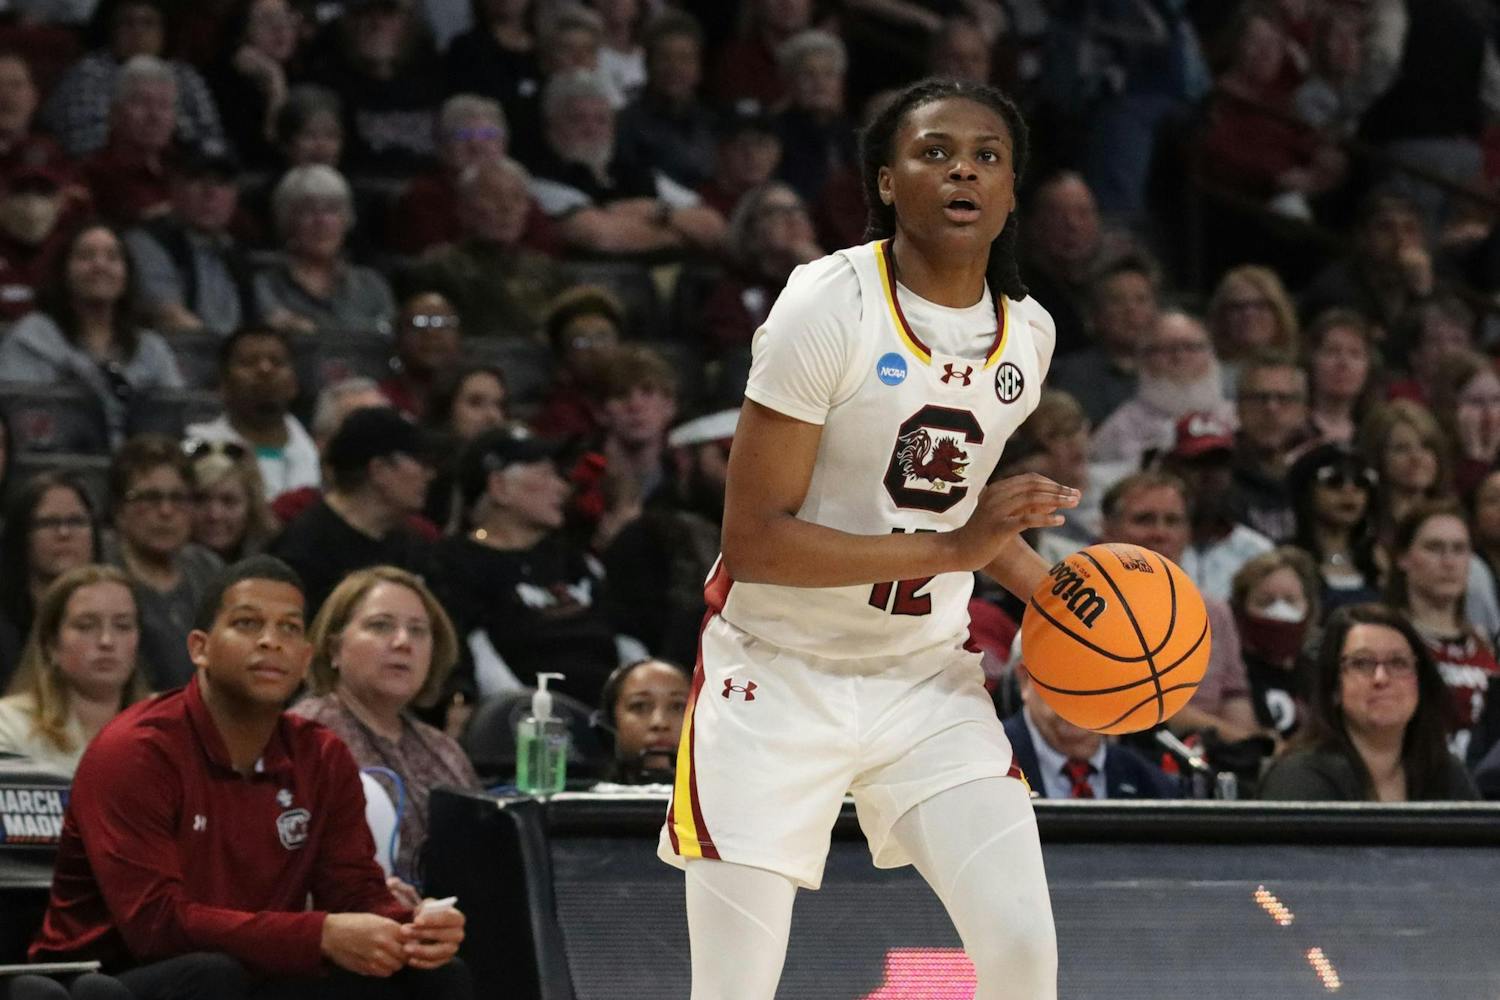 Freshman guard MiLaysia Fulwiley prepares to shoot in South Carolina's second-round game against North Carolina in the 2024 NCAA Women’s Tournament on March 24, 2024. Fulwiley scored 20 points in the ɫɫƵs’ 88-41 win over the Tar Heels.